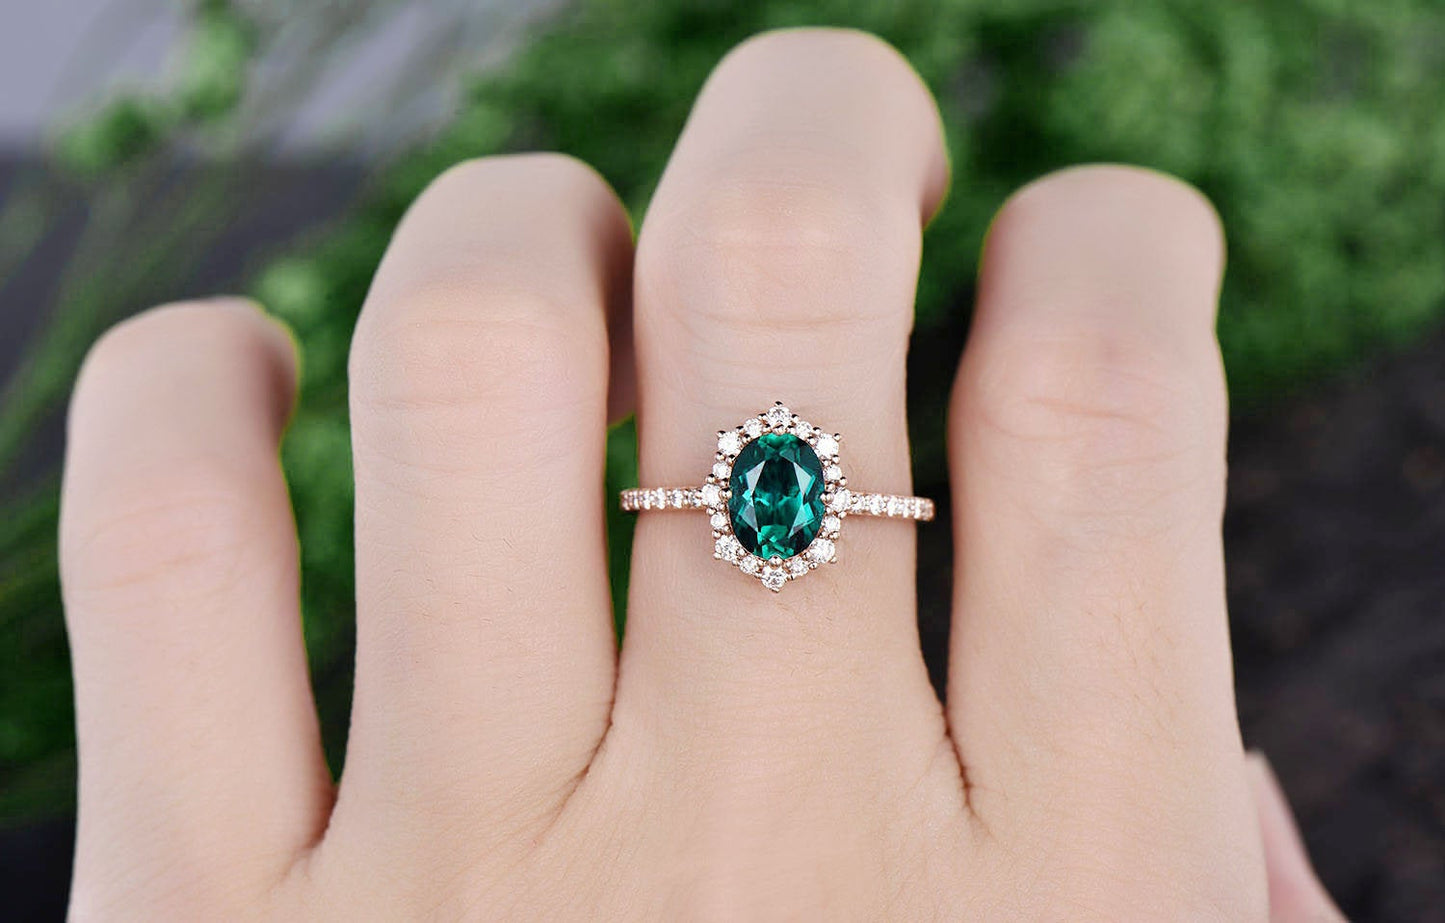 1.3ct emerald ring vintage halo moissanite ring emerald engagement ring solid rose gold anniversary birthday gift for women